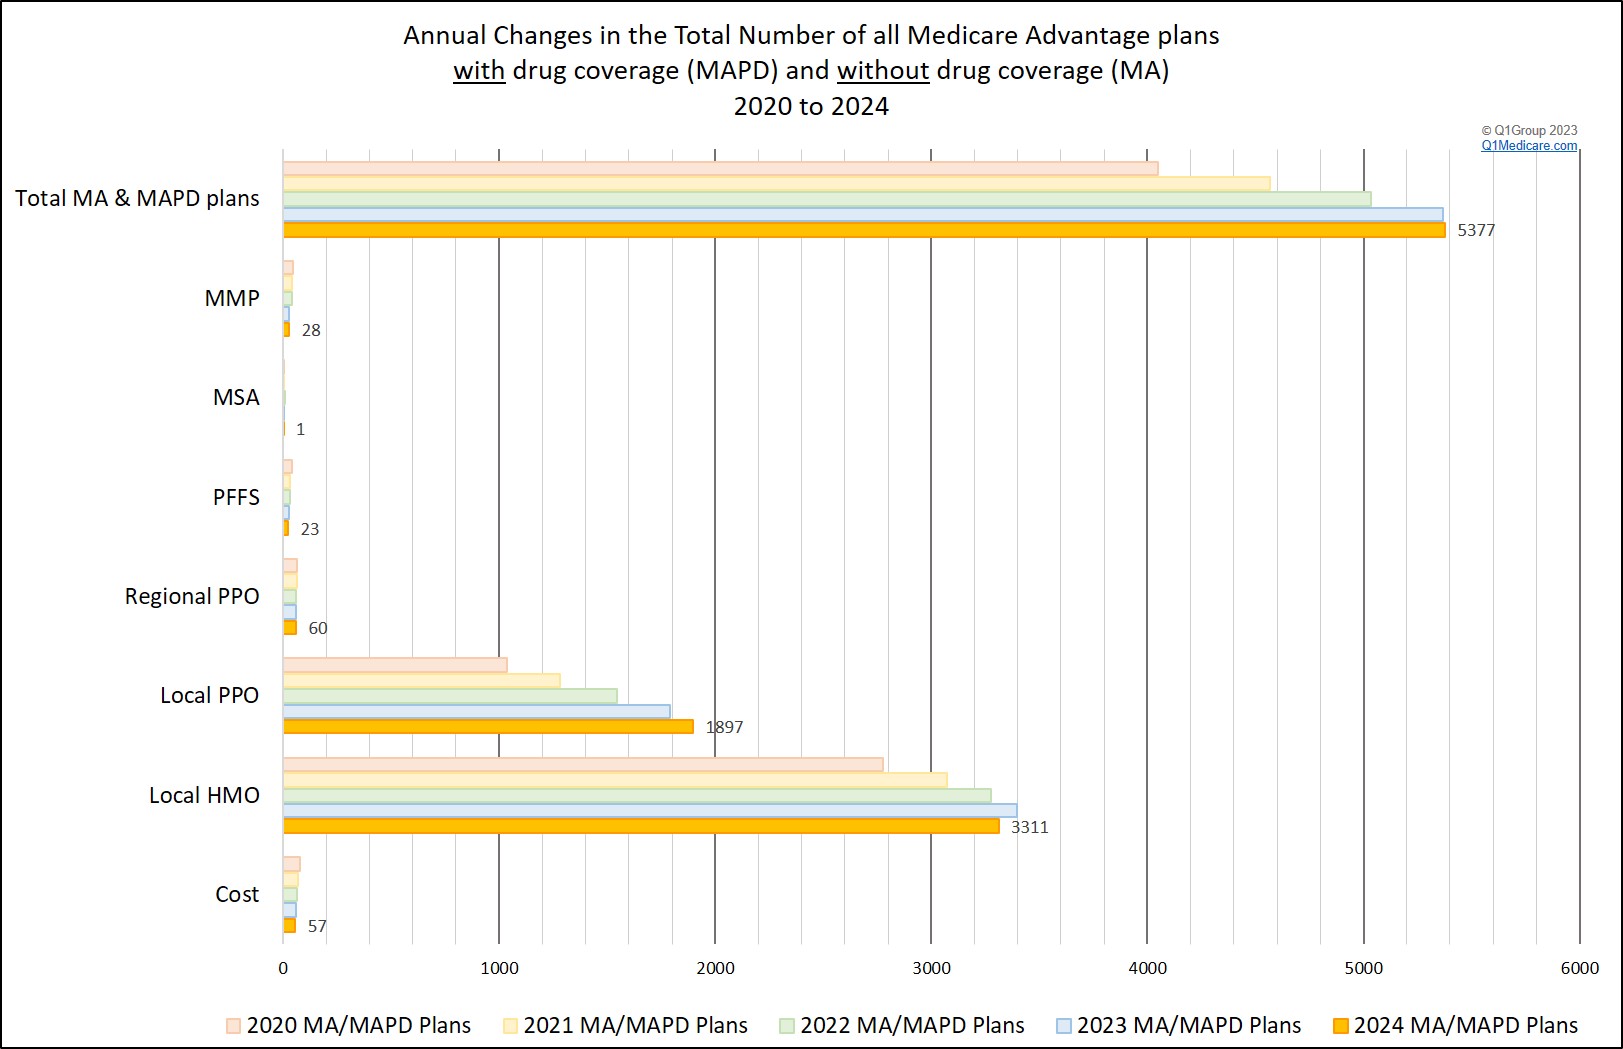 Q1Medicare overview of all Medicare Advantage plan types